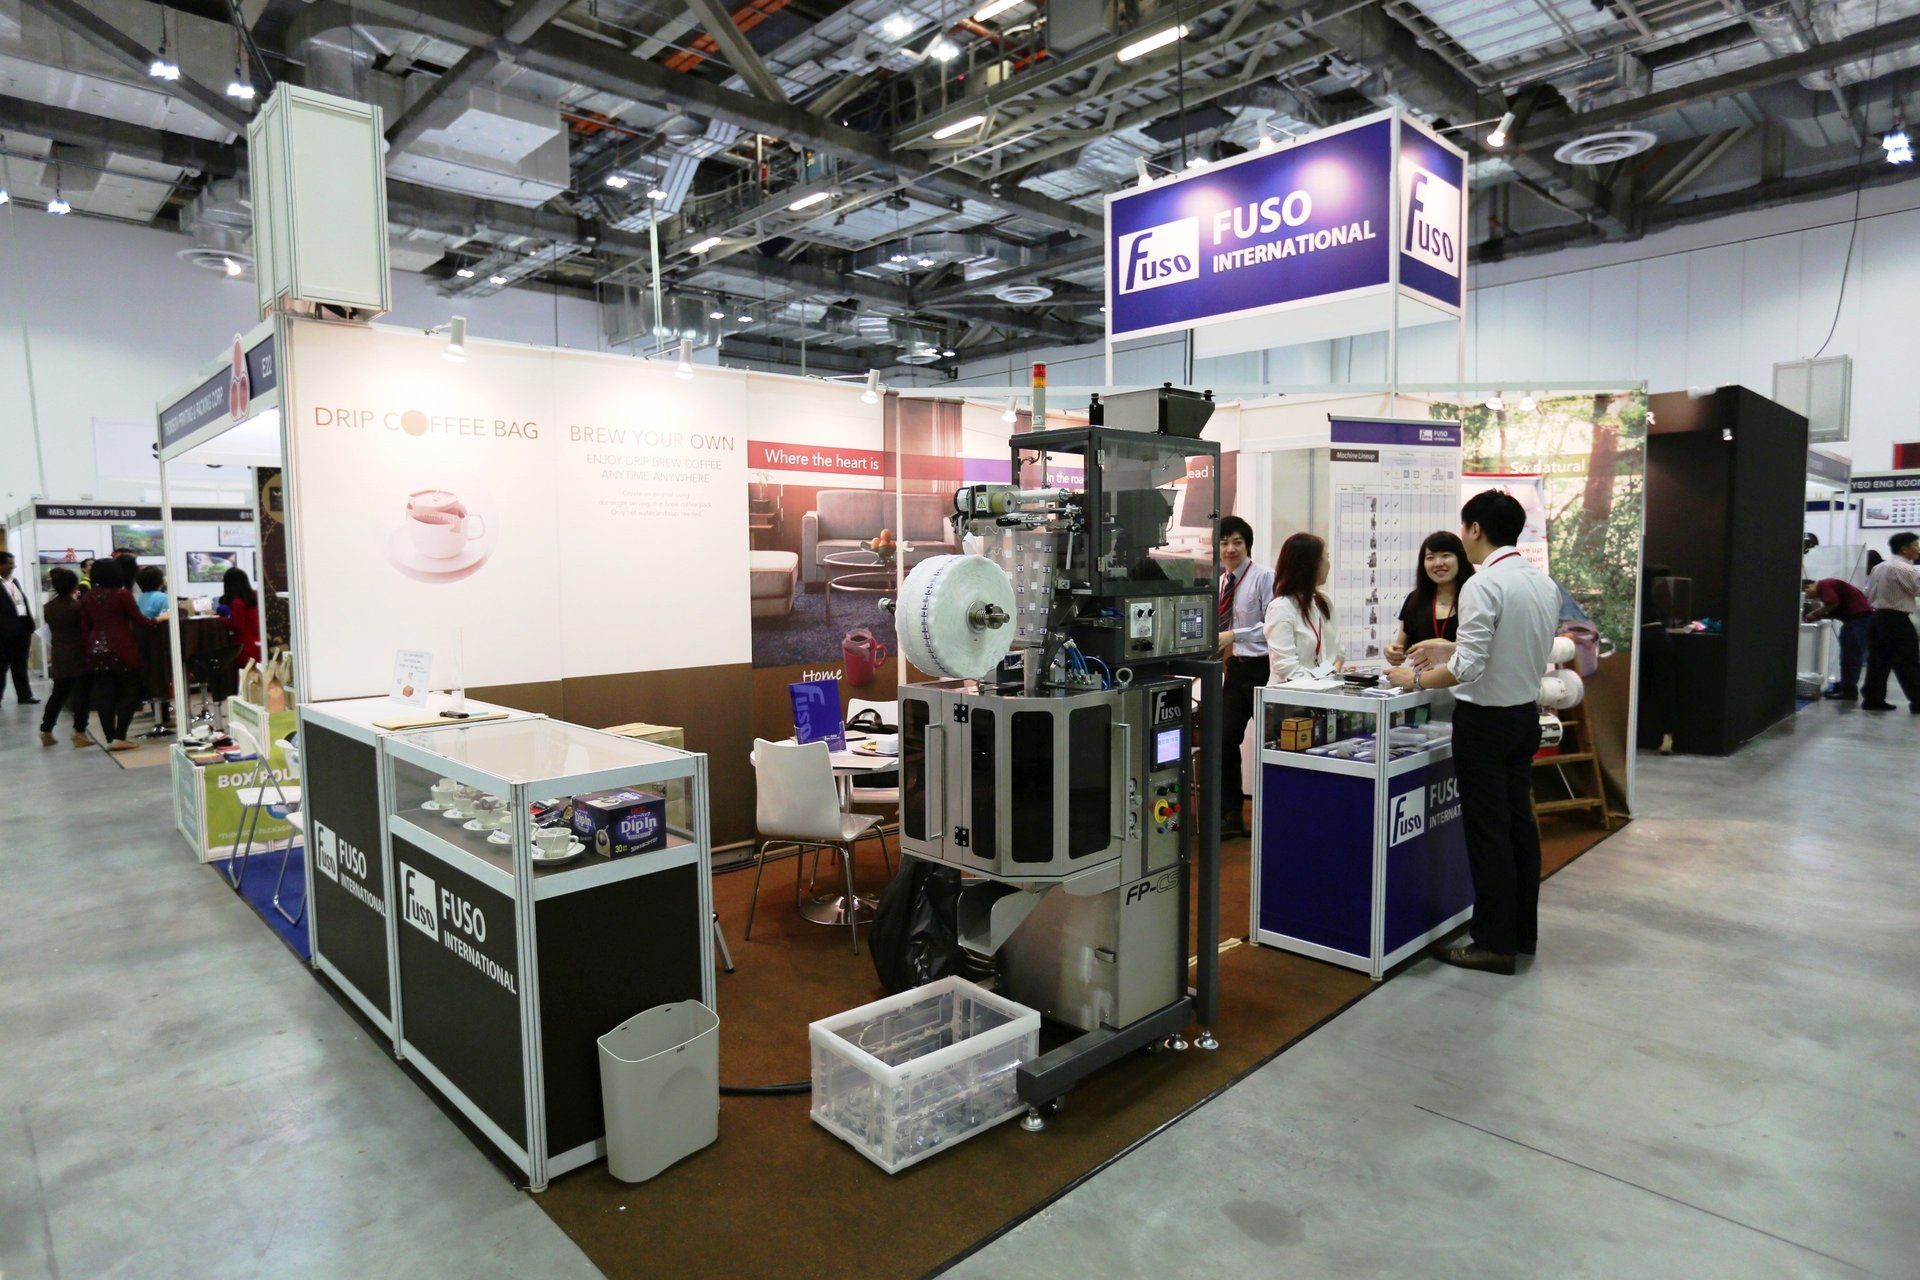 Fuso International @ Cafe Asia 2014. Booth designed and built by Essential Global Fairs.